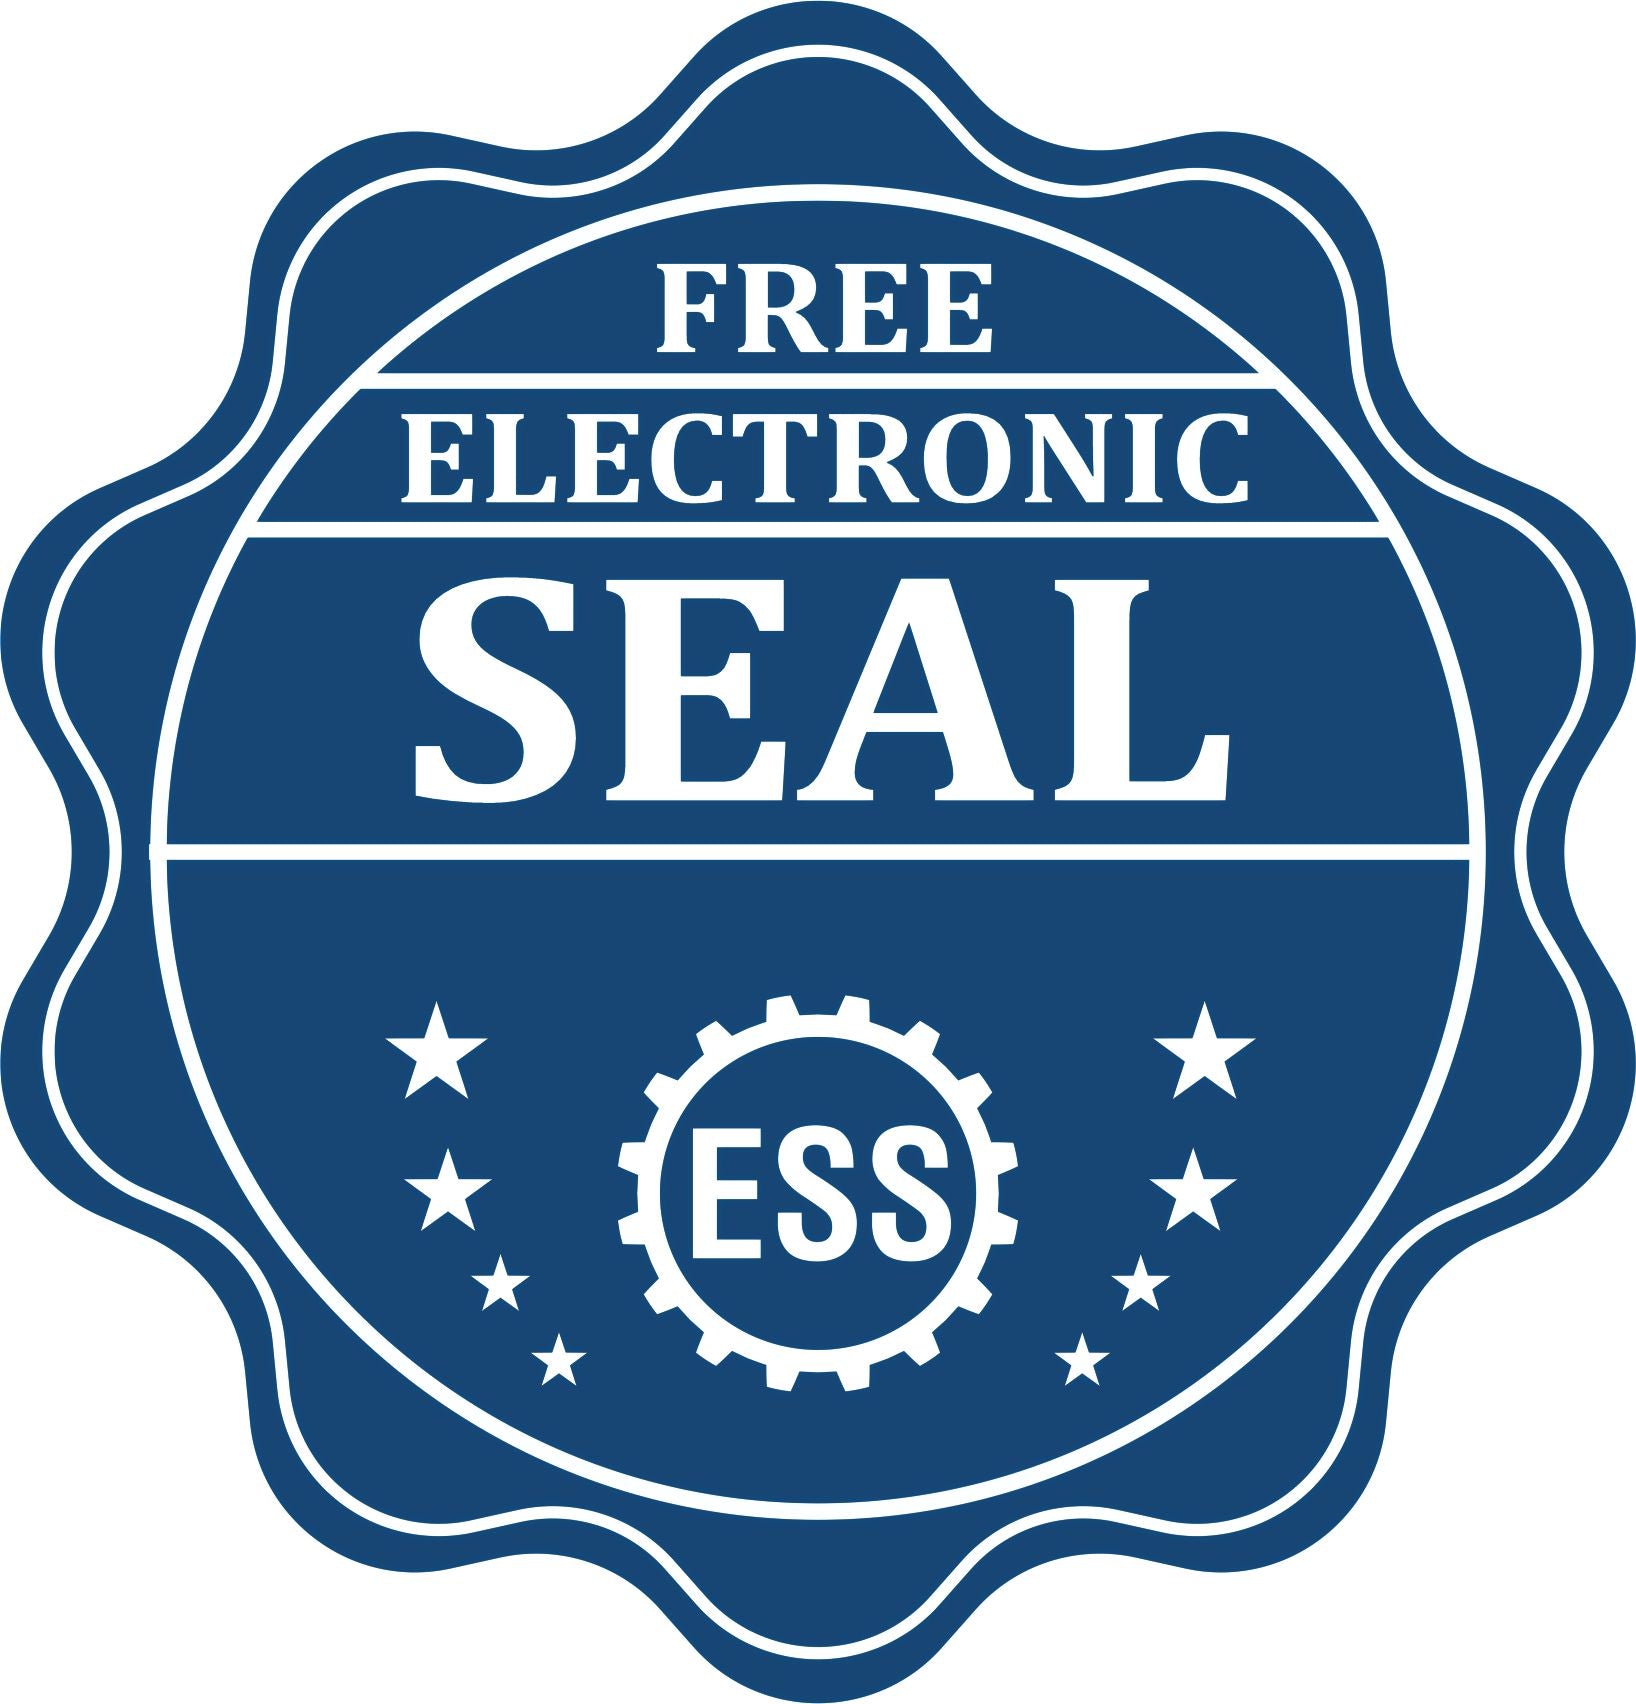 A badge showing a free electronic seal for the Hybrid District of Columbia Engineer Seal with stars and the ESS gear on the emblem.